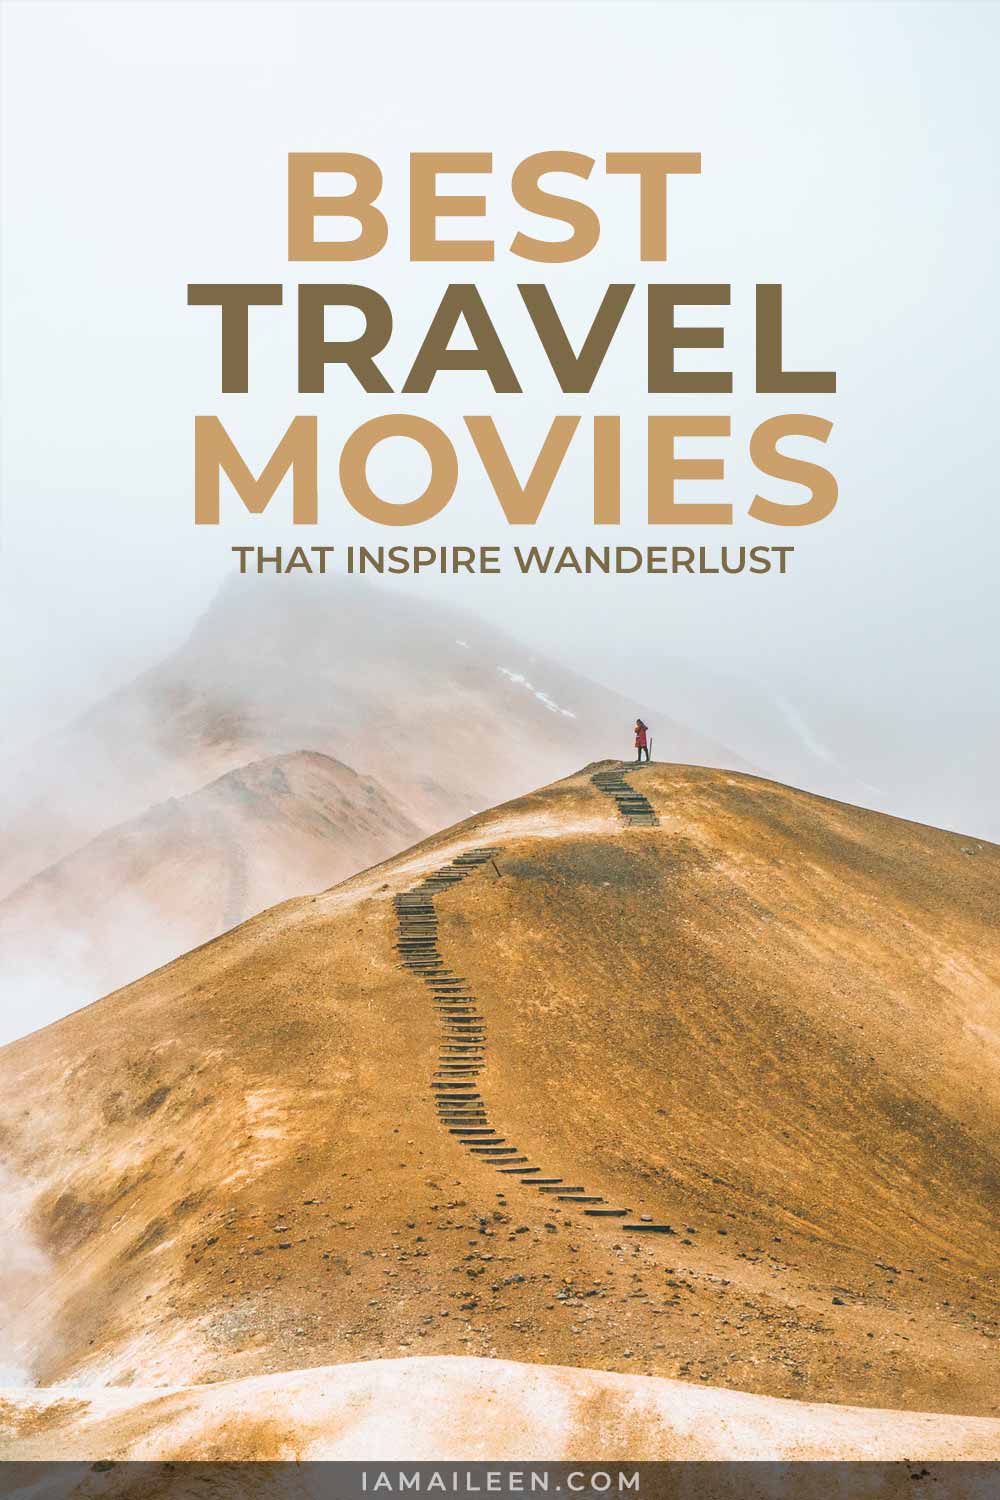 Best Travel Movies in The World